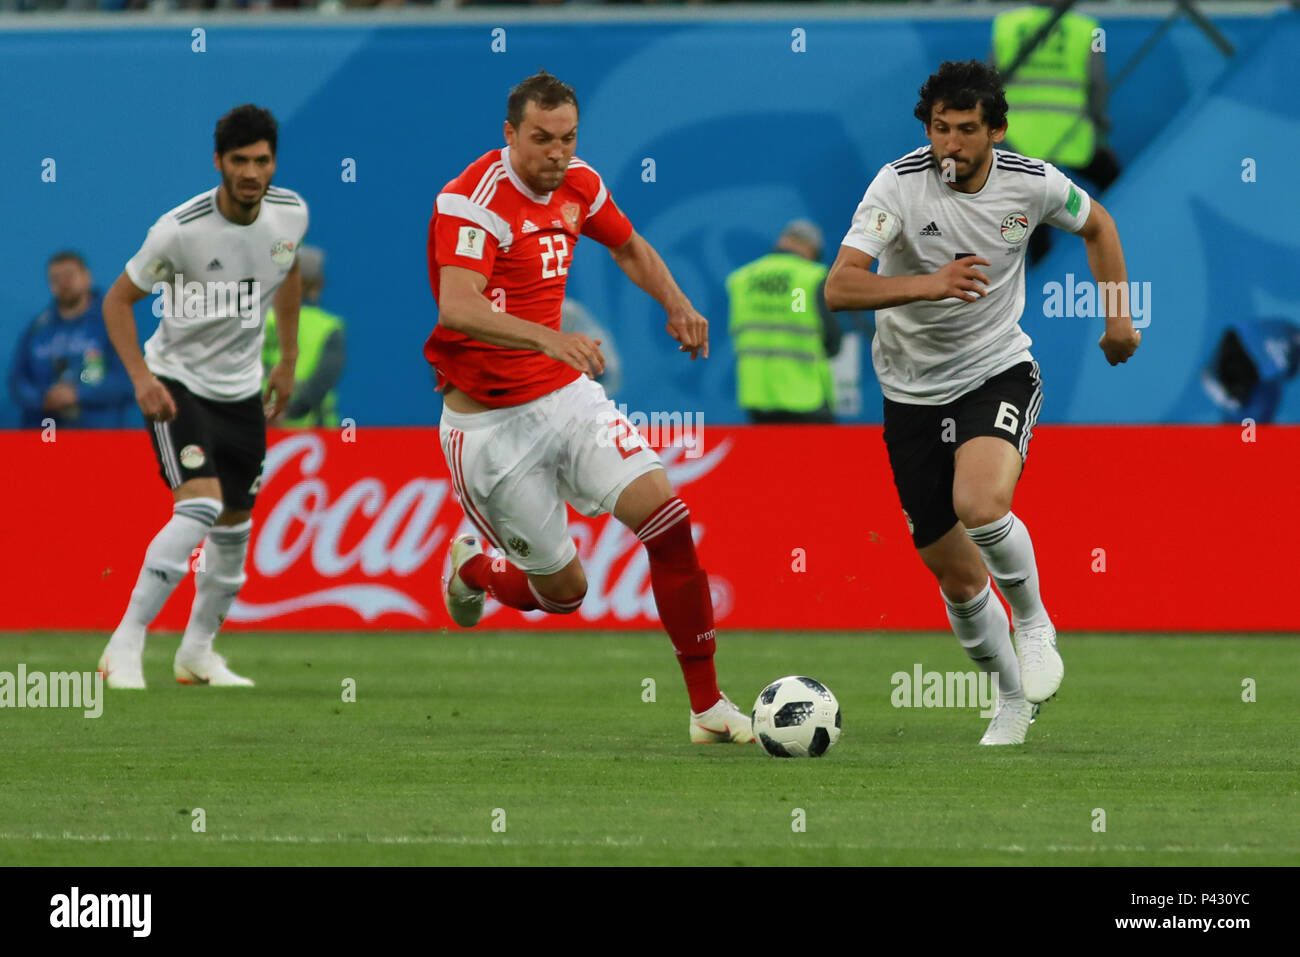 St Petersburg, Russia. 19 June 2018. Dzyuba and Ahmed Hegazy during the match between Russia and Egypt valid for the 2018 World Cup held at the Zenit Arena in St. Petersburg, Russia. (Photo: Ricardo Moreira/Fotoarena) Credit: Foto Arena LTDA/Alamy Live News Stock Photo